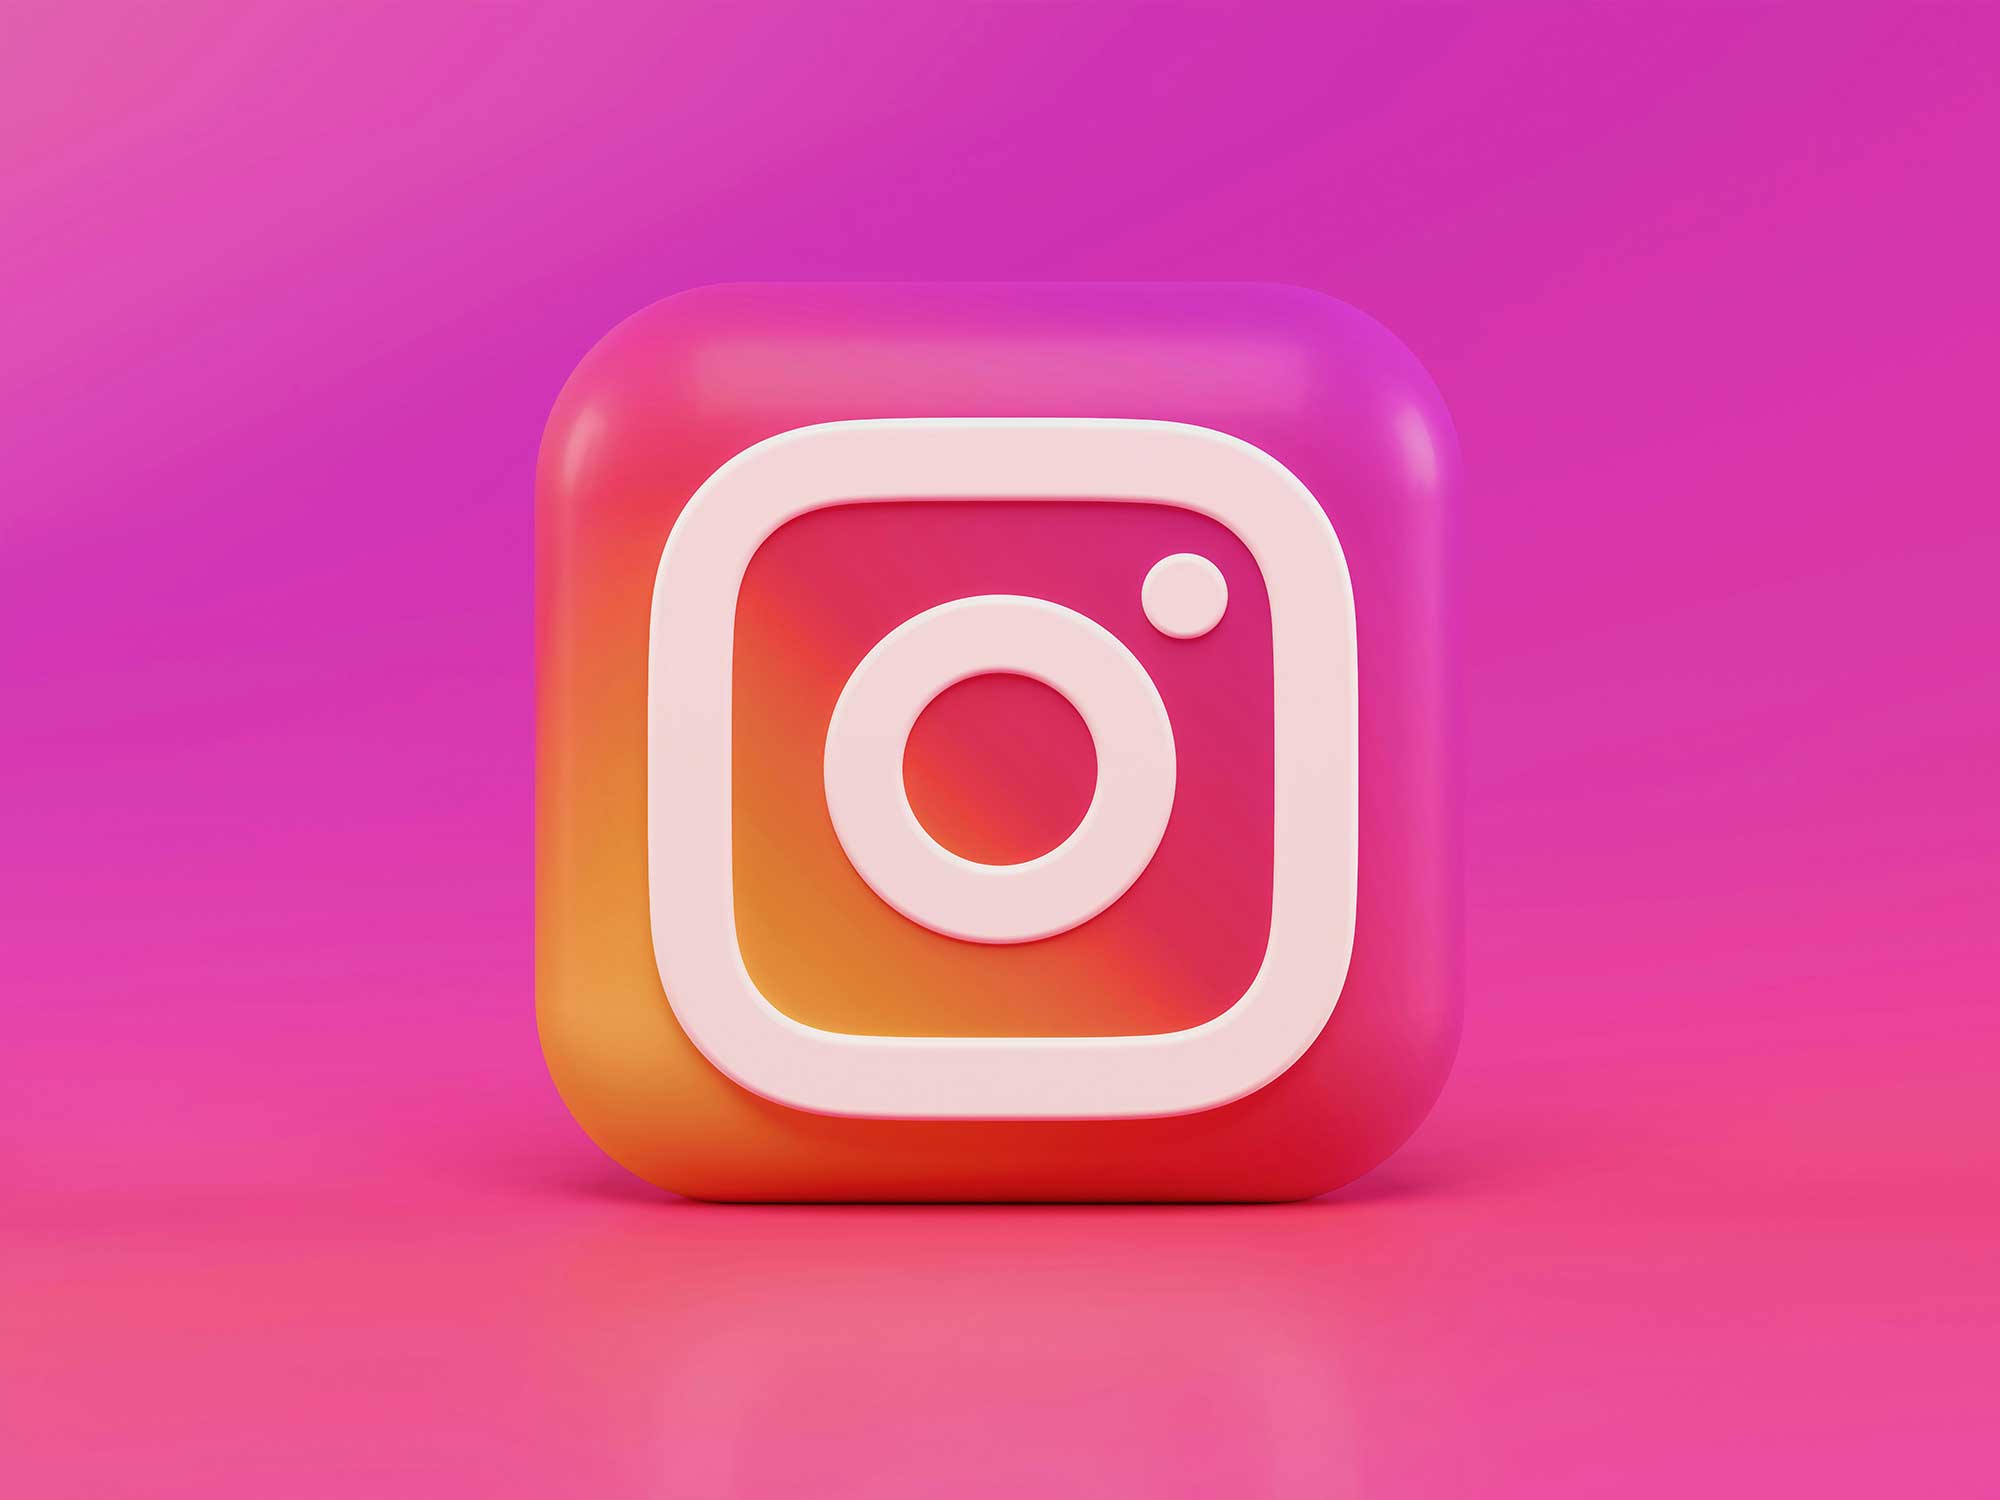 Instagram's logo in 3D with a pink background.